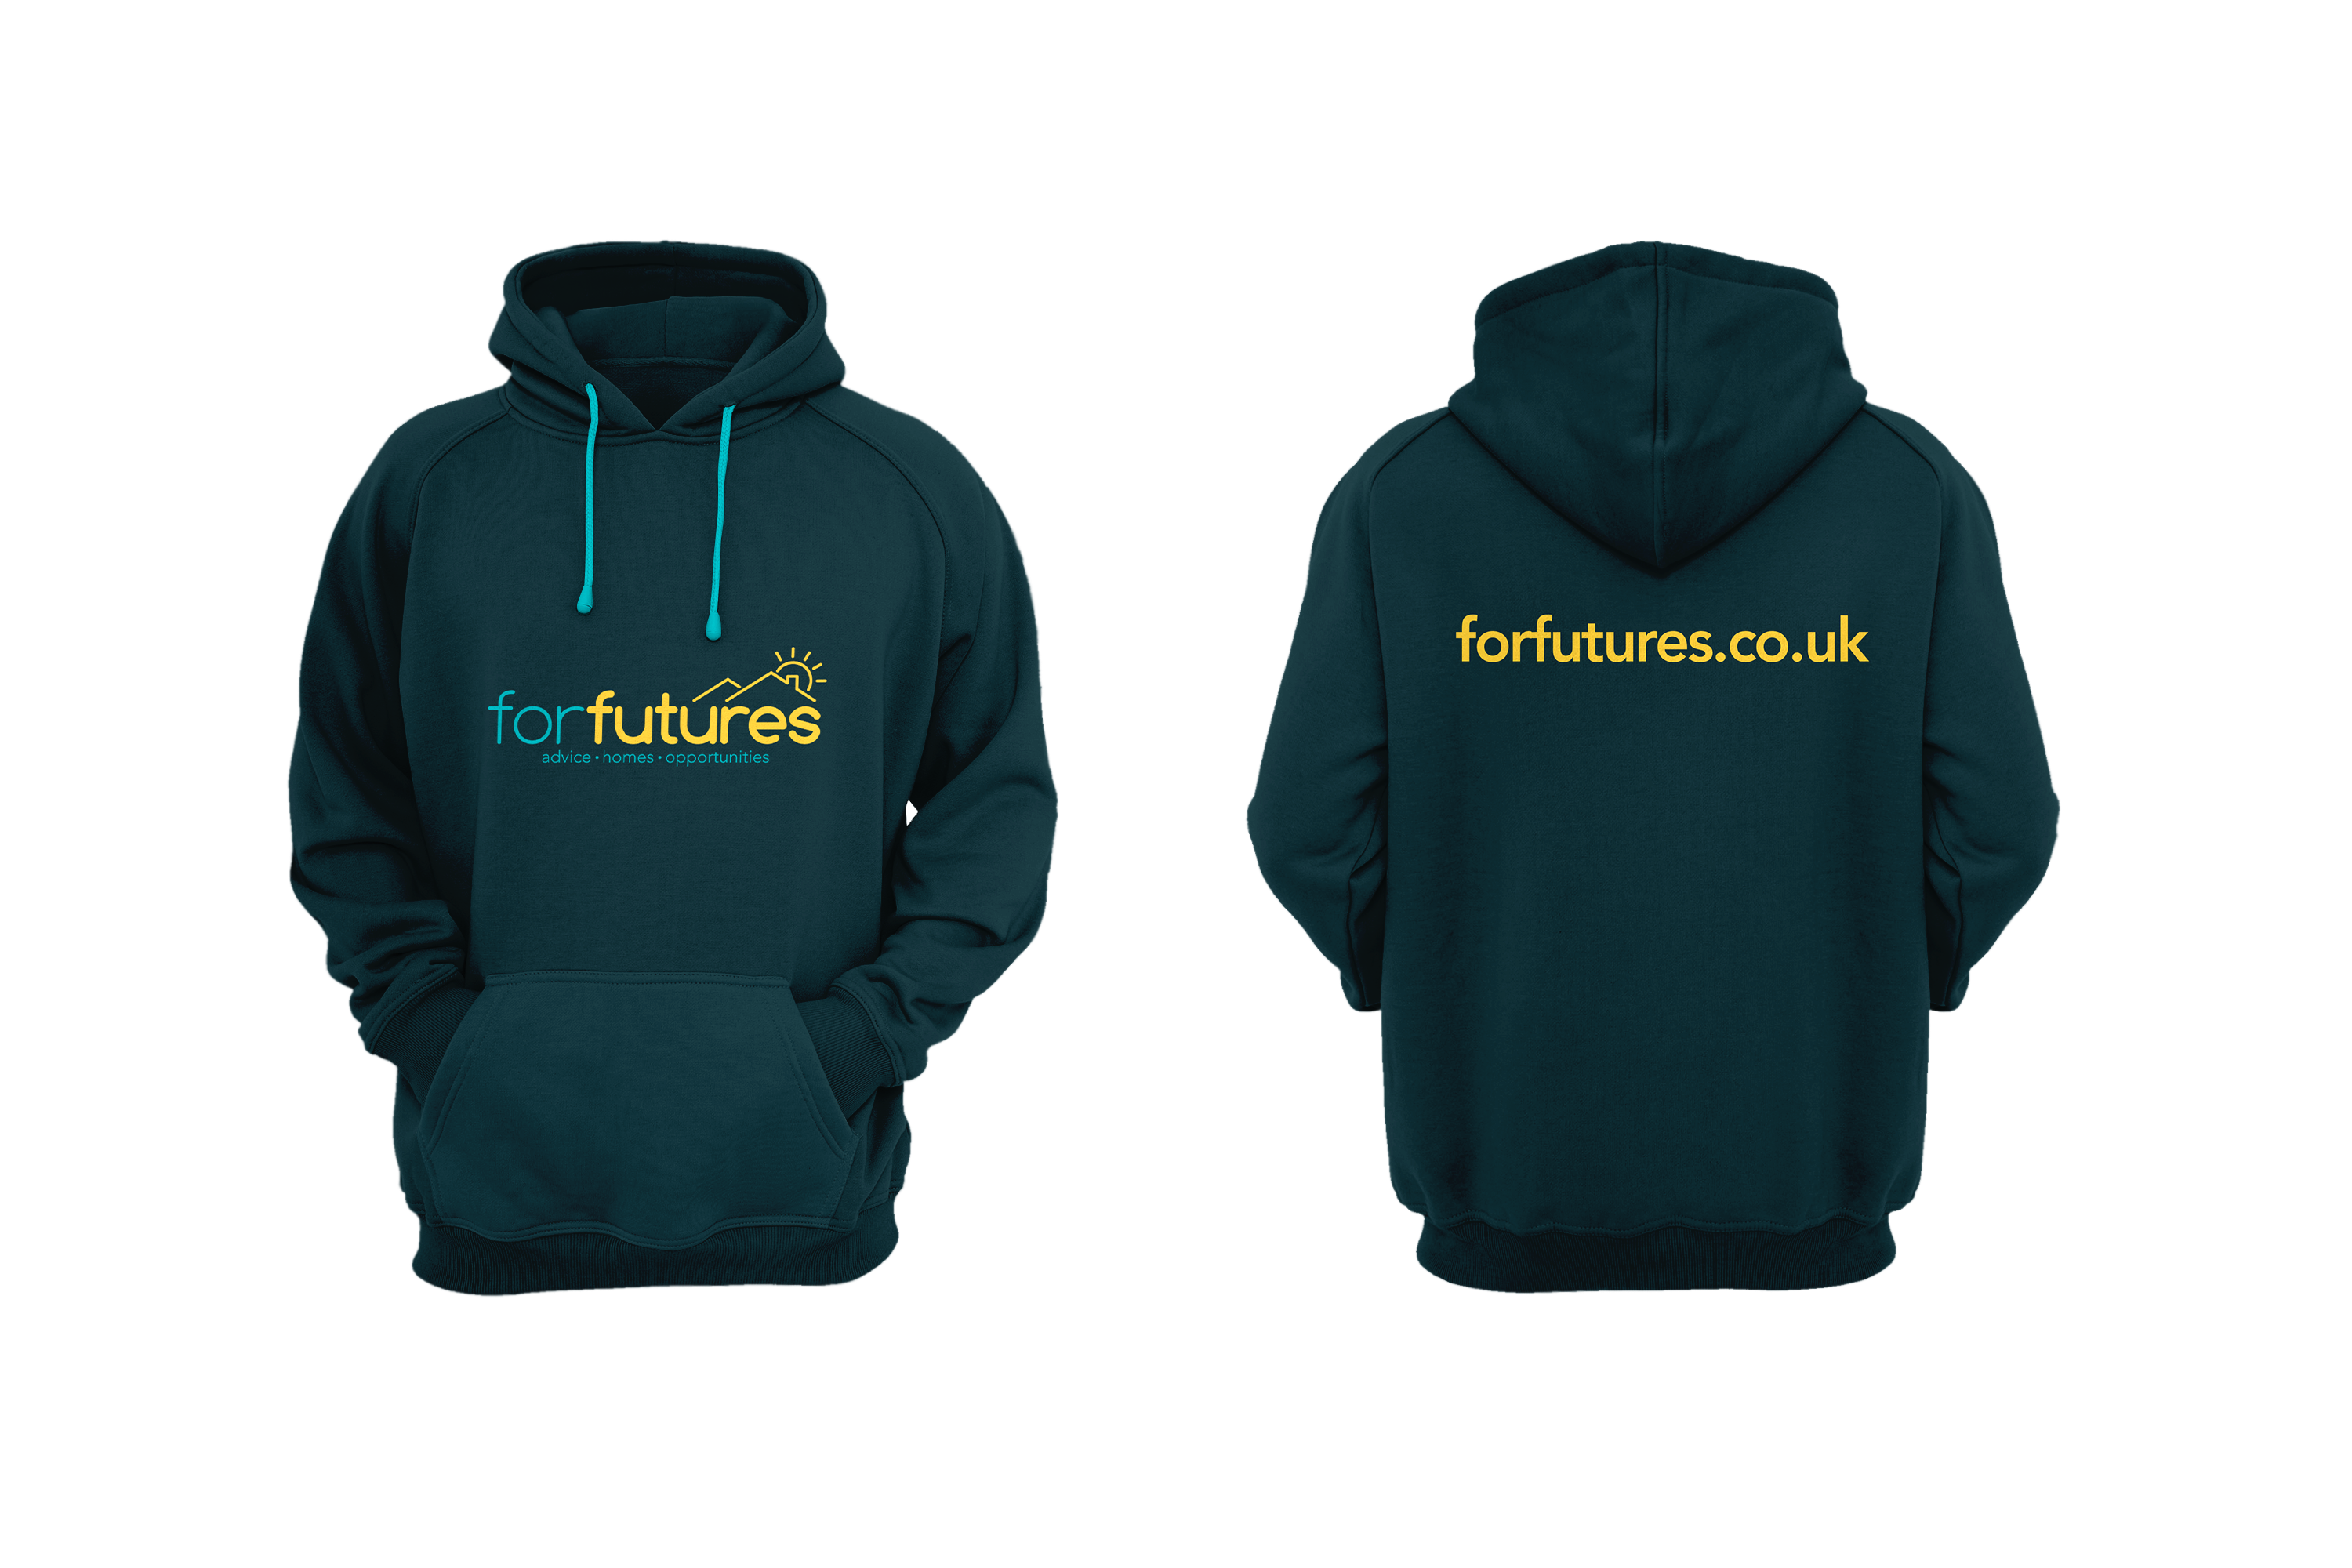 front and back of dark blue green hoody with forfutures logo on front and the web address forfutures.co.uk on the back